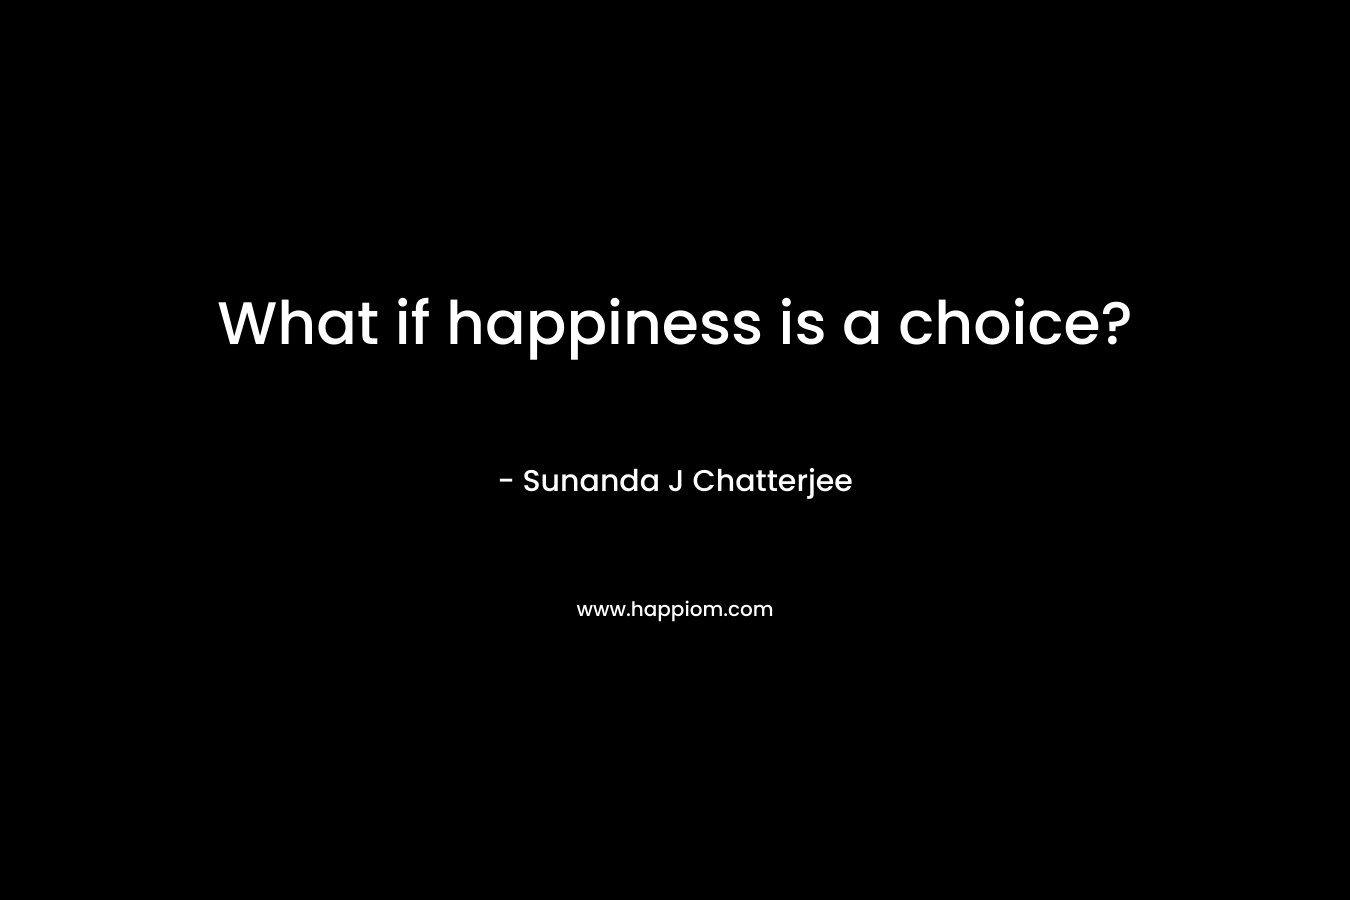 What if happiness is a choice? – Sunanda J Chatterjee